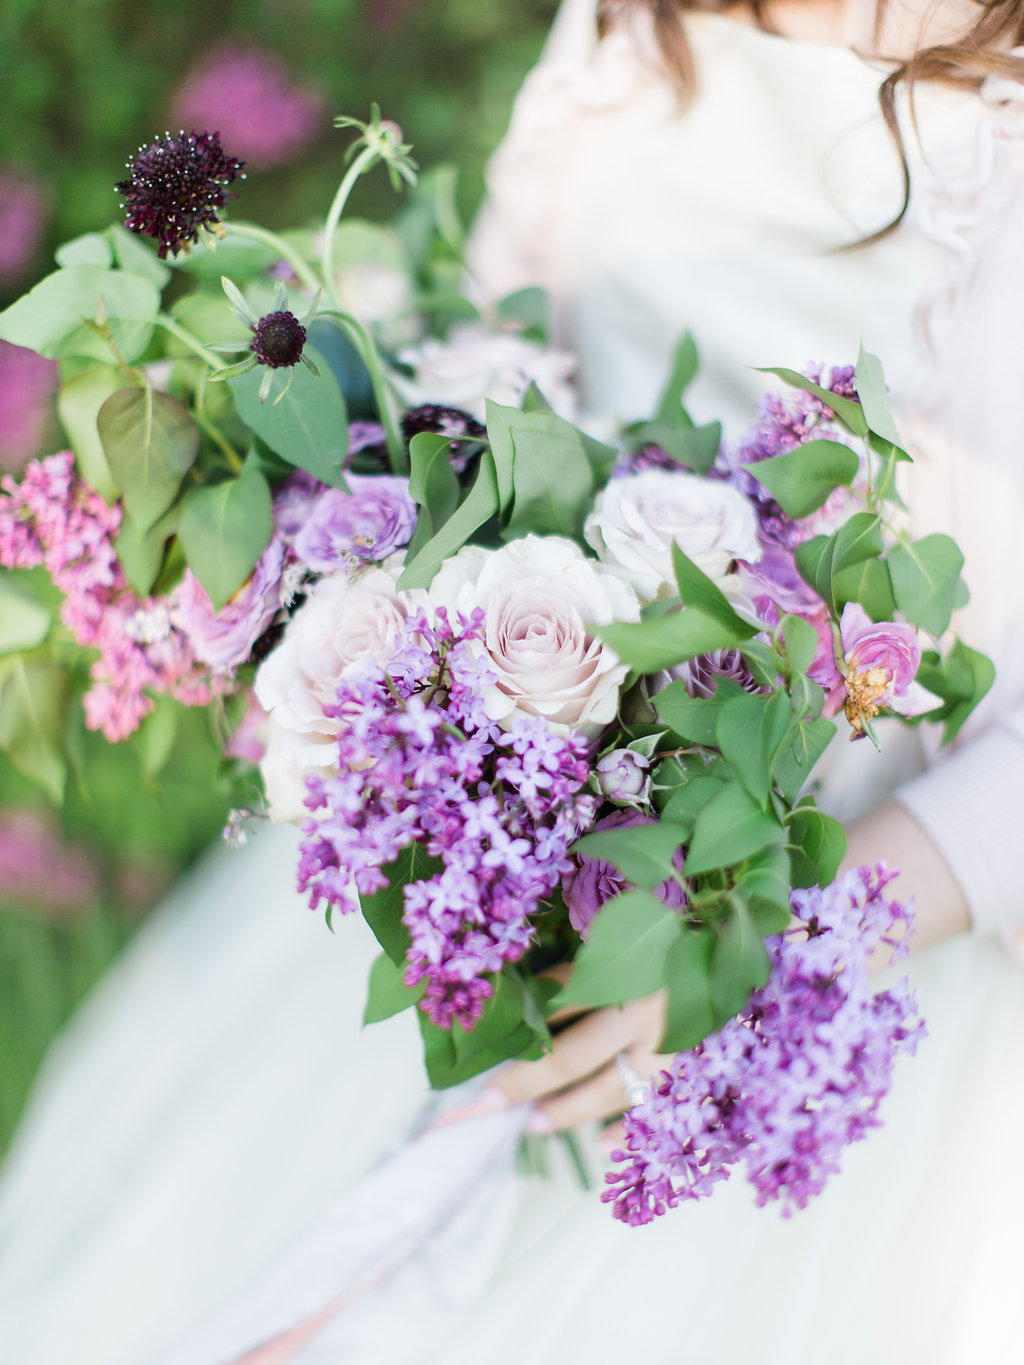 Purple Bridal Bouquet | The Day's Design | Ashley Slater Photography